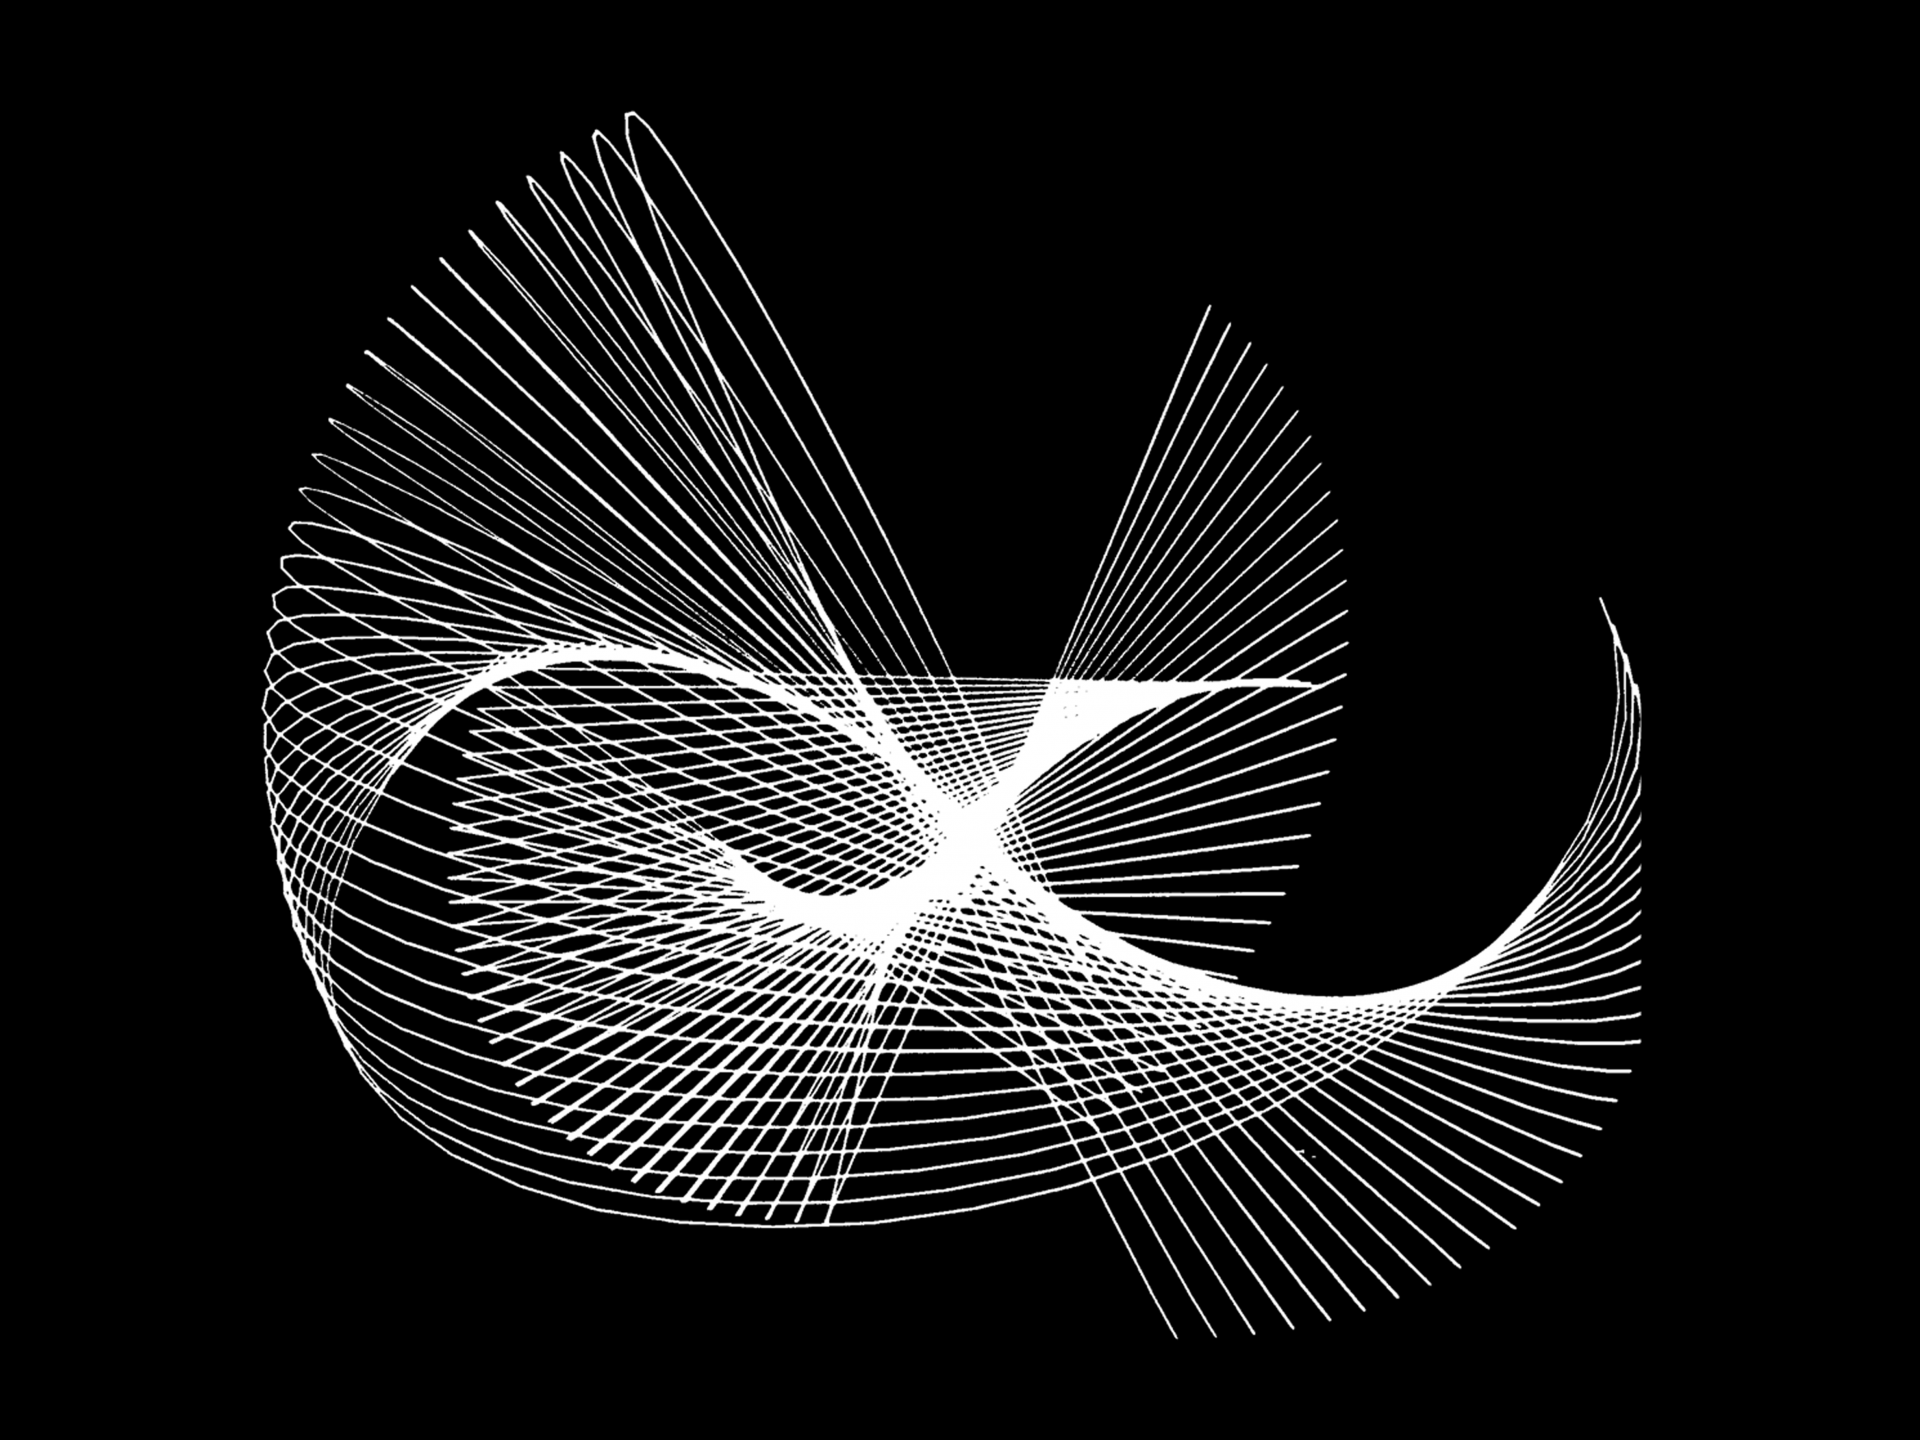 A computer-generated image of white lines forming a curving volume against a black background